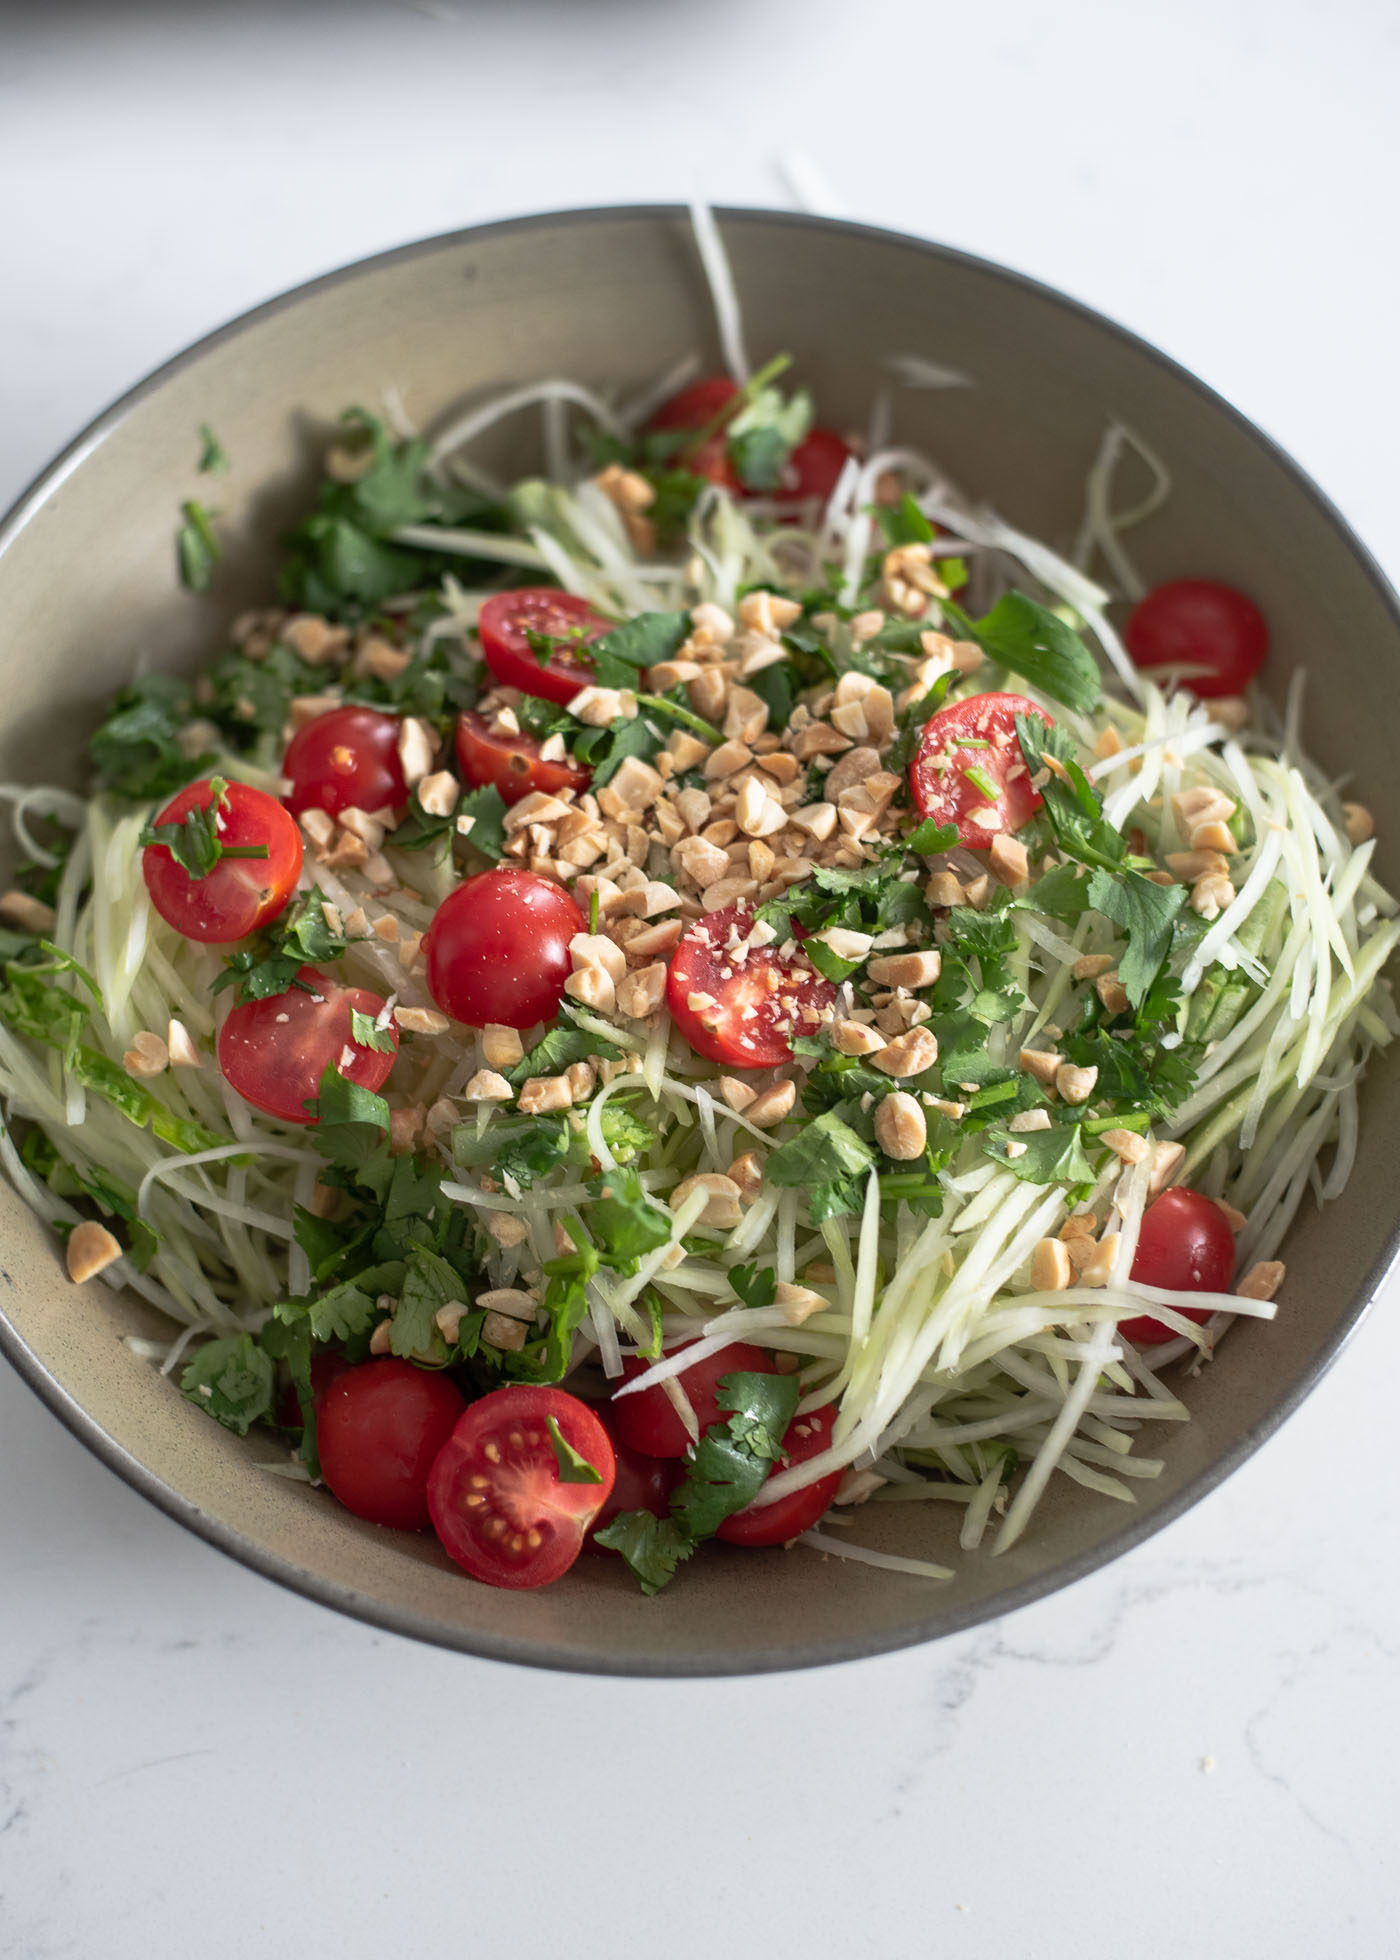 Shredded papaya, tomato, peanuts are combined with salad dressing in a large bowl.